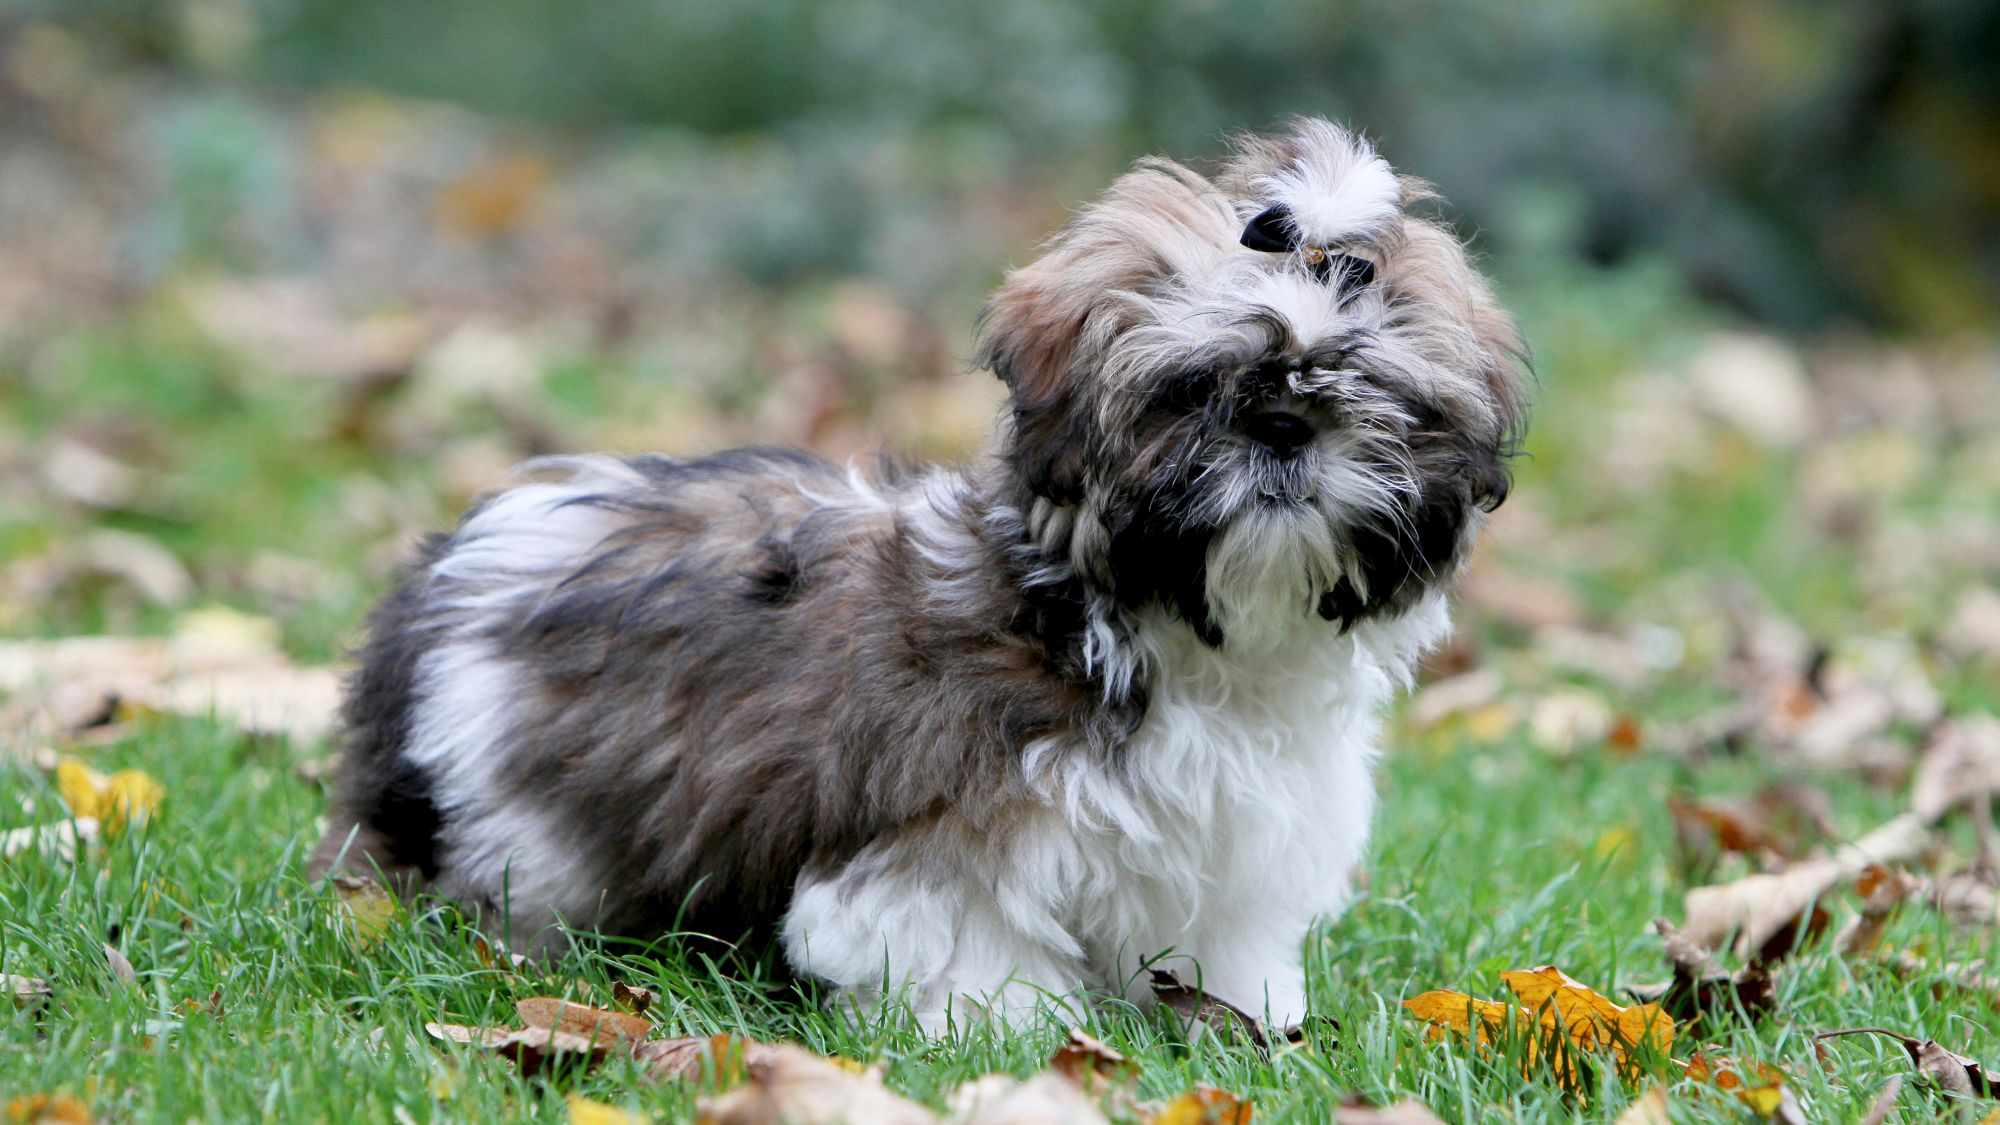 Shih Tzu standing on grass scattered with dried leaves